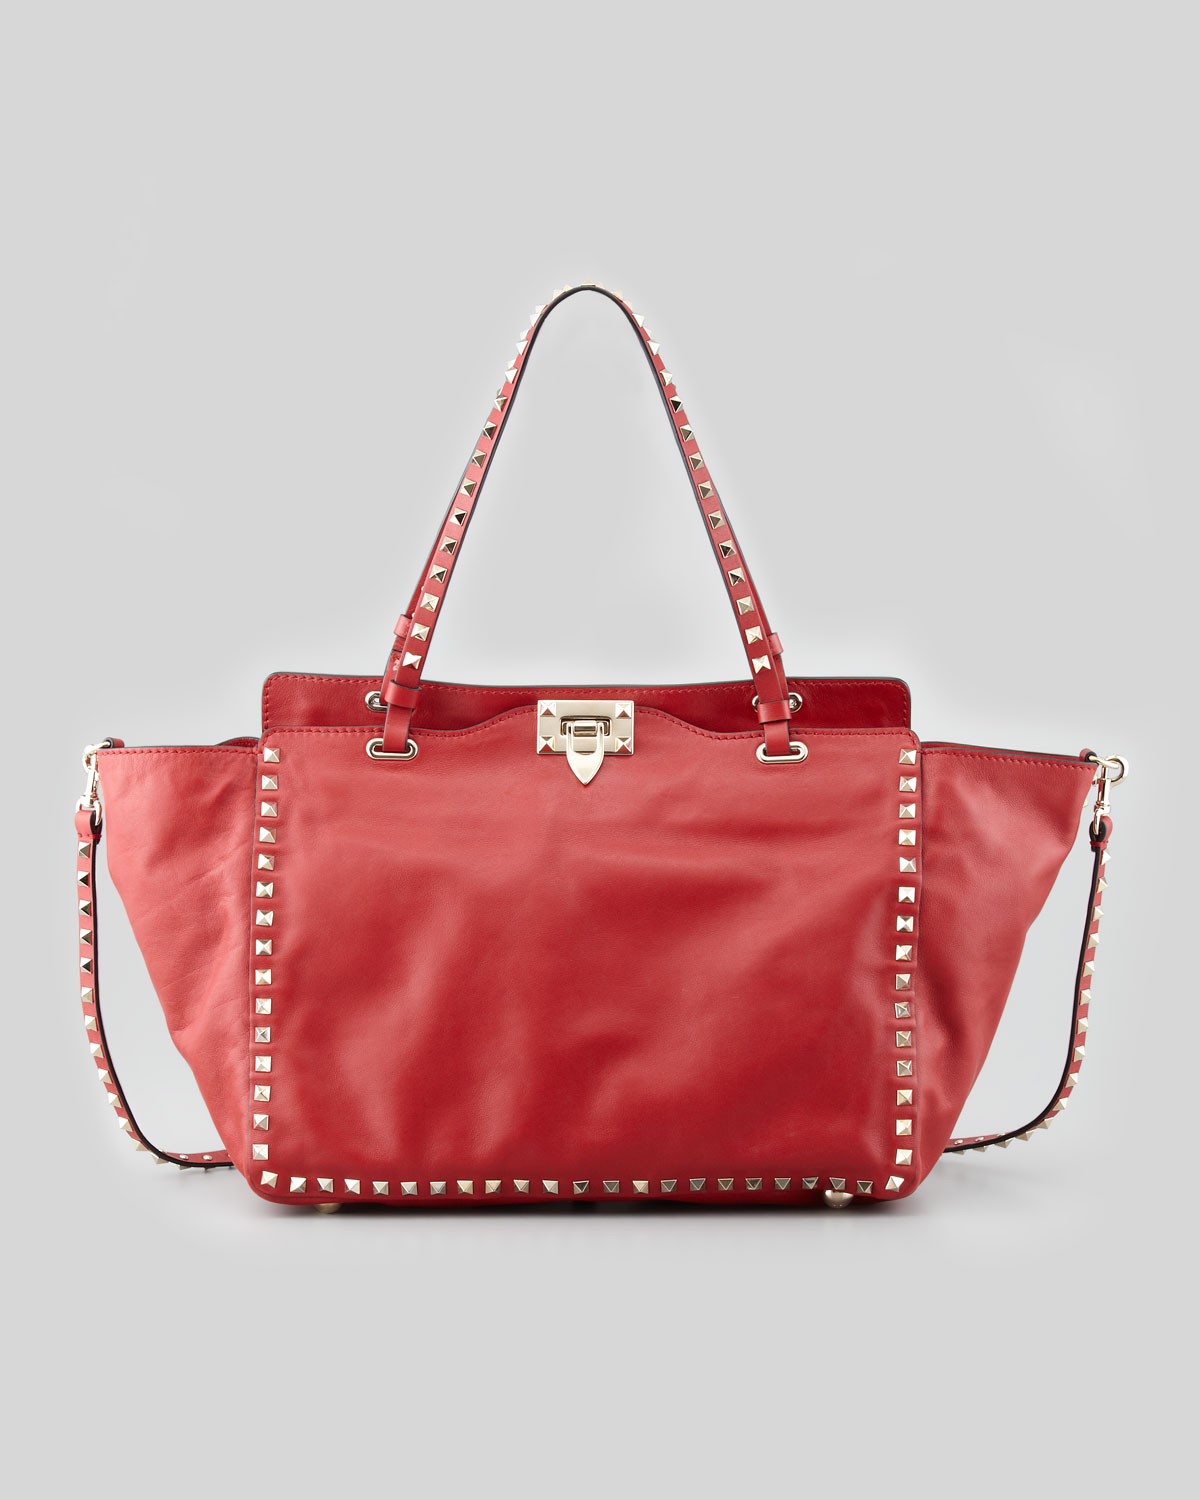 Lyst - Valentino Rockstud Medium Leather Tote Bag in Red